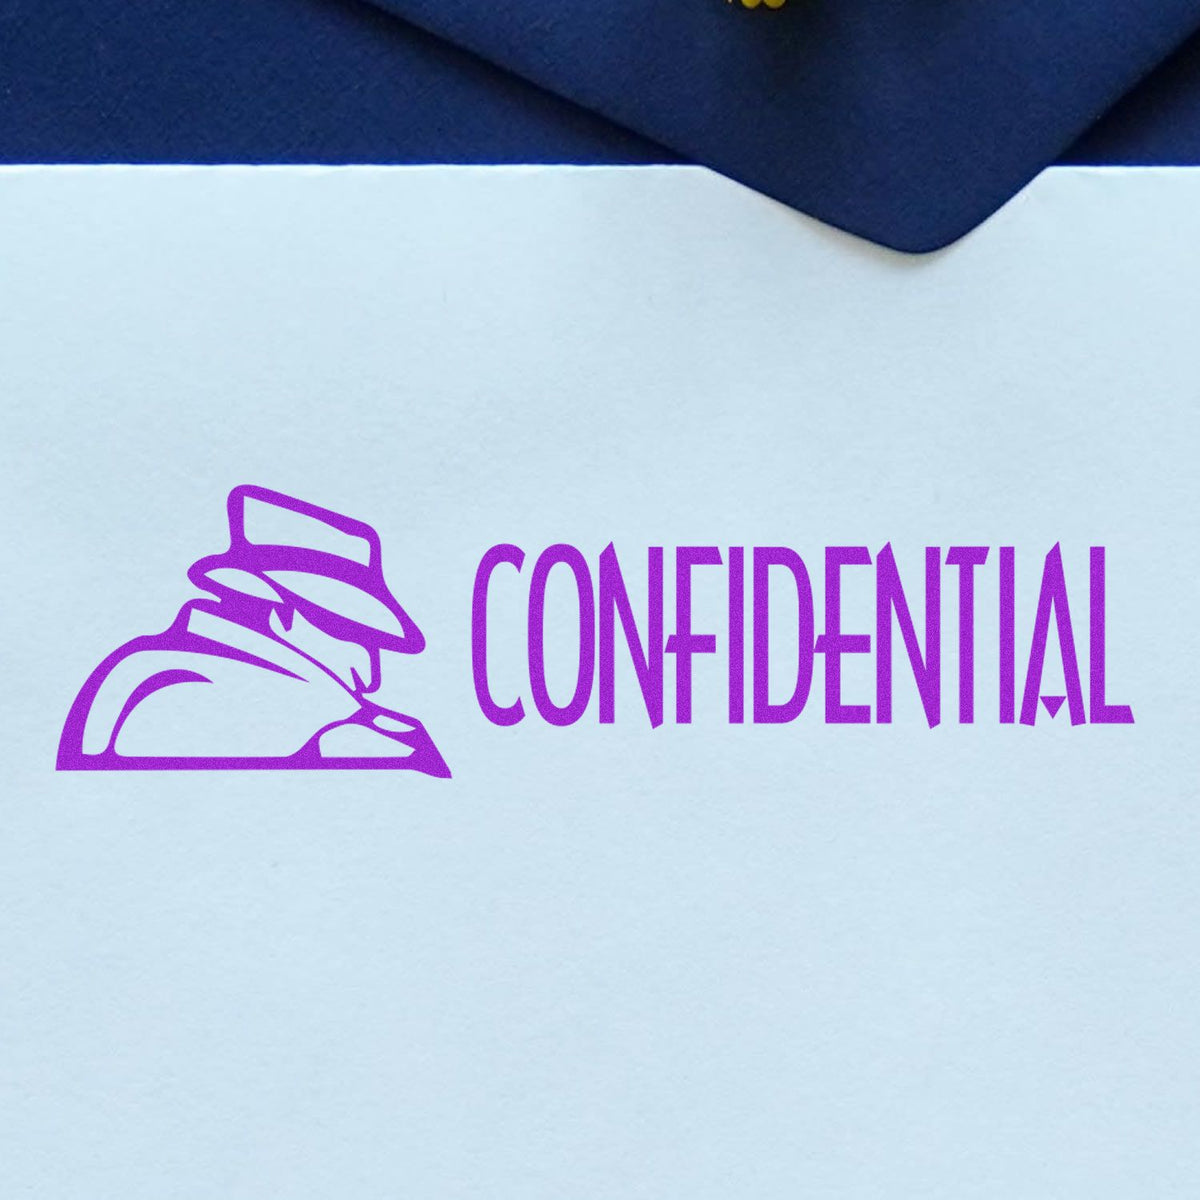 Large Self-Inking Confidential with Logo Stamp In Use